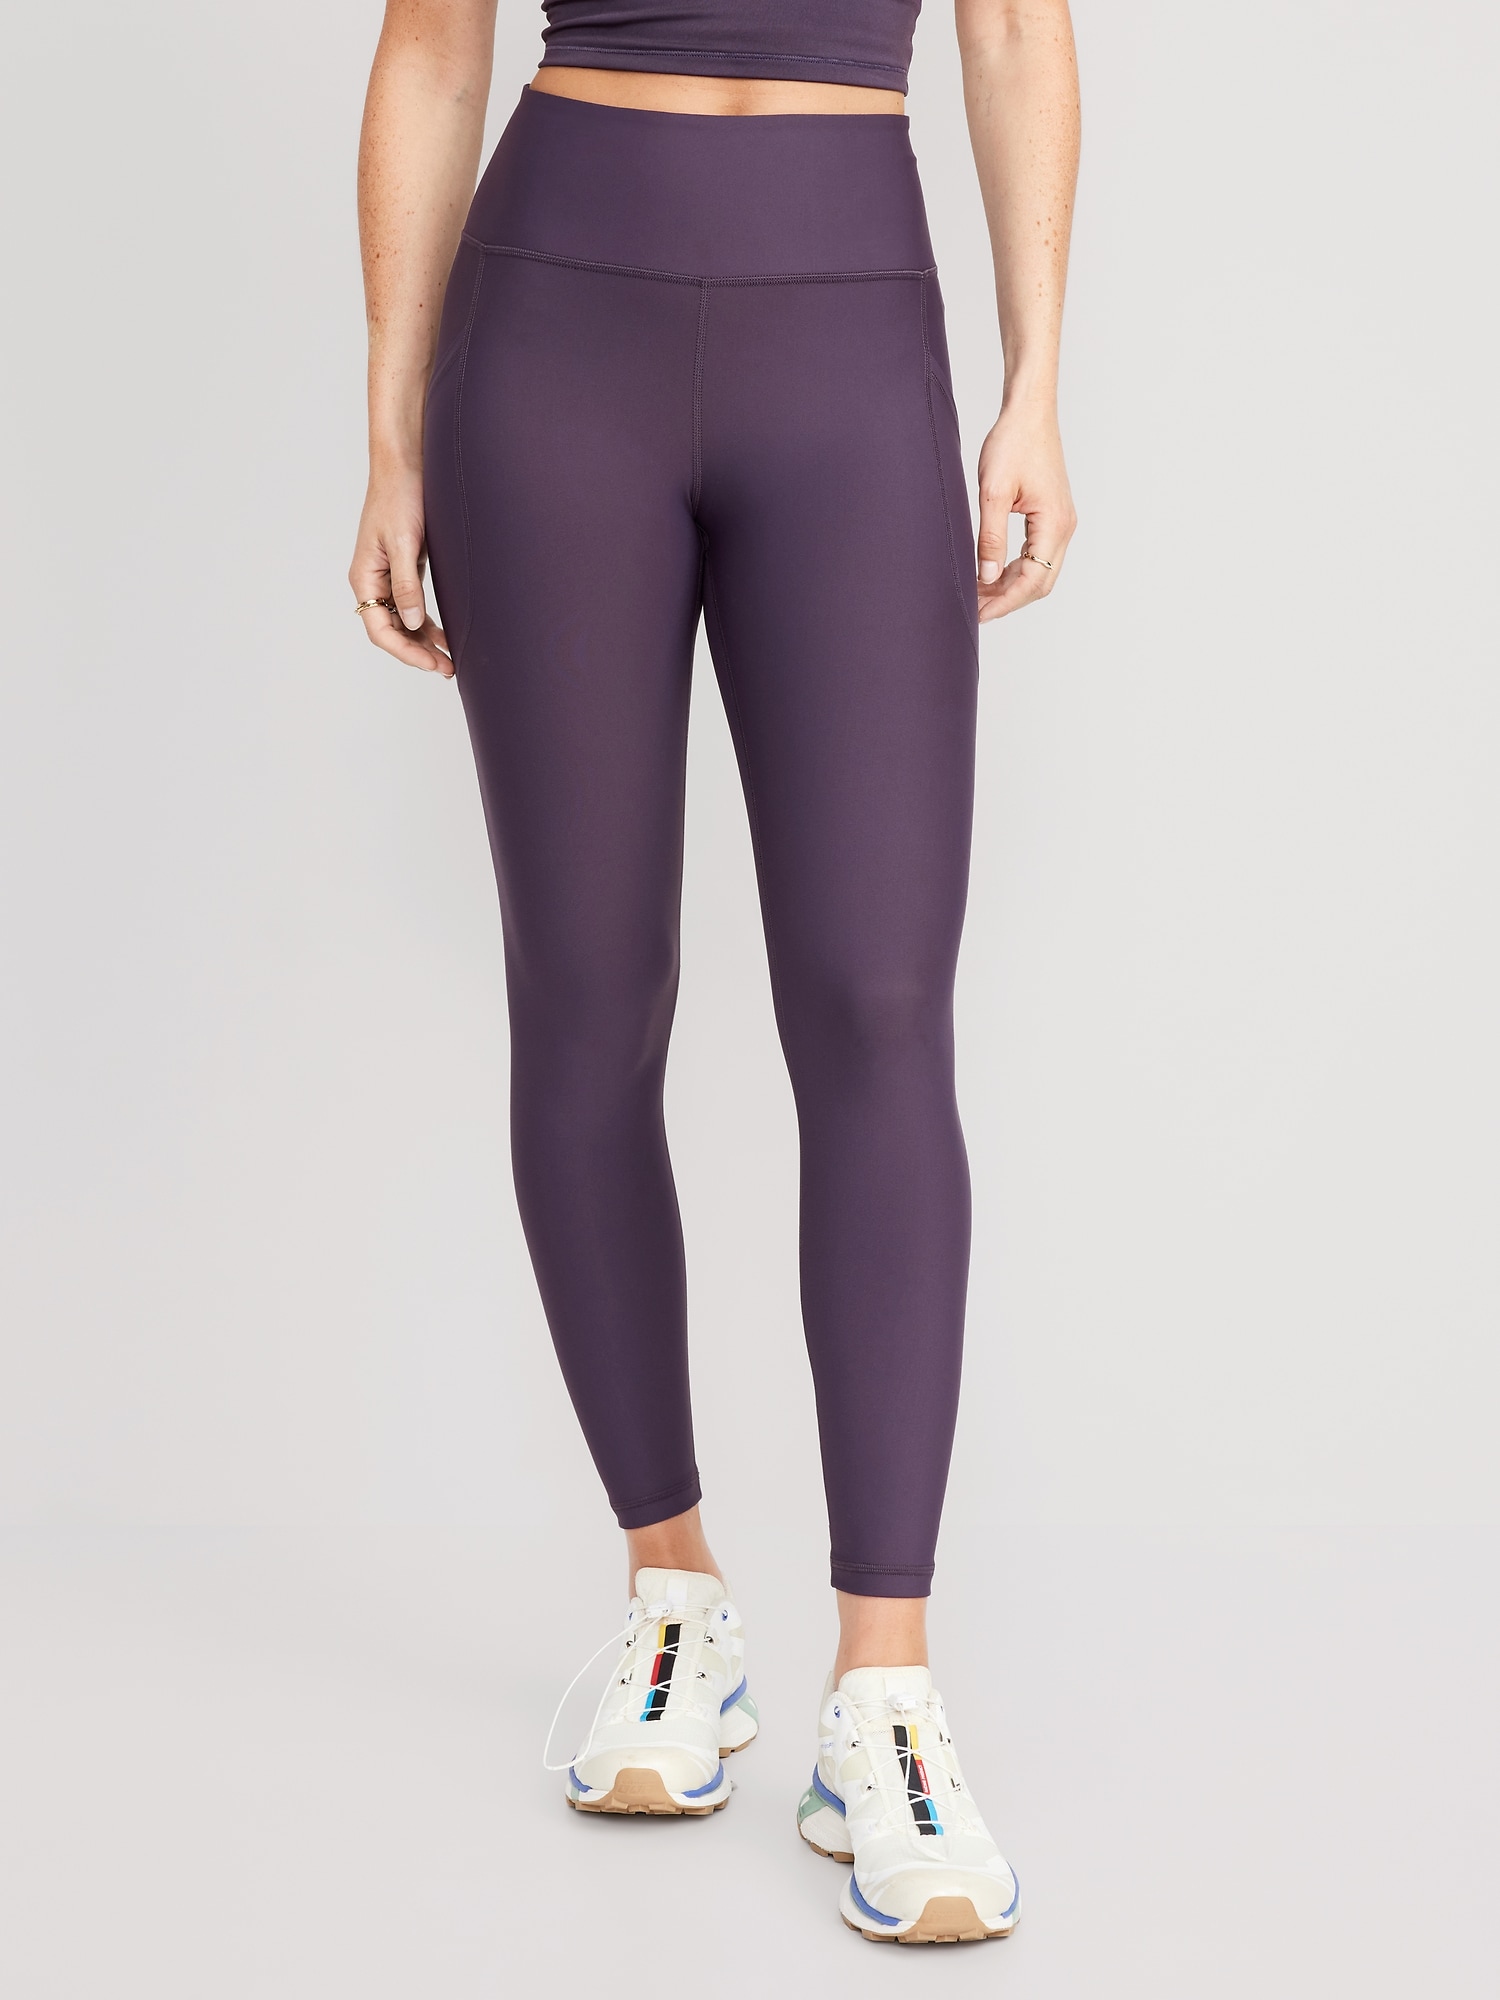 Old Navy Active Powersoft Purple High-Rise Ankle Leggings Go-Dry Size XL 14  16